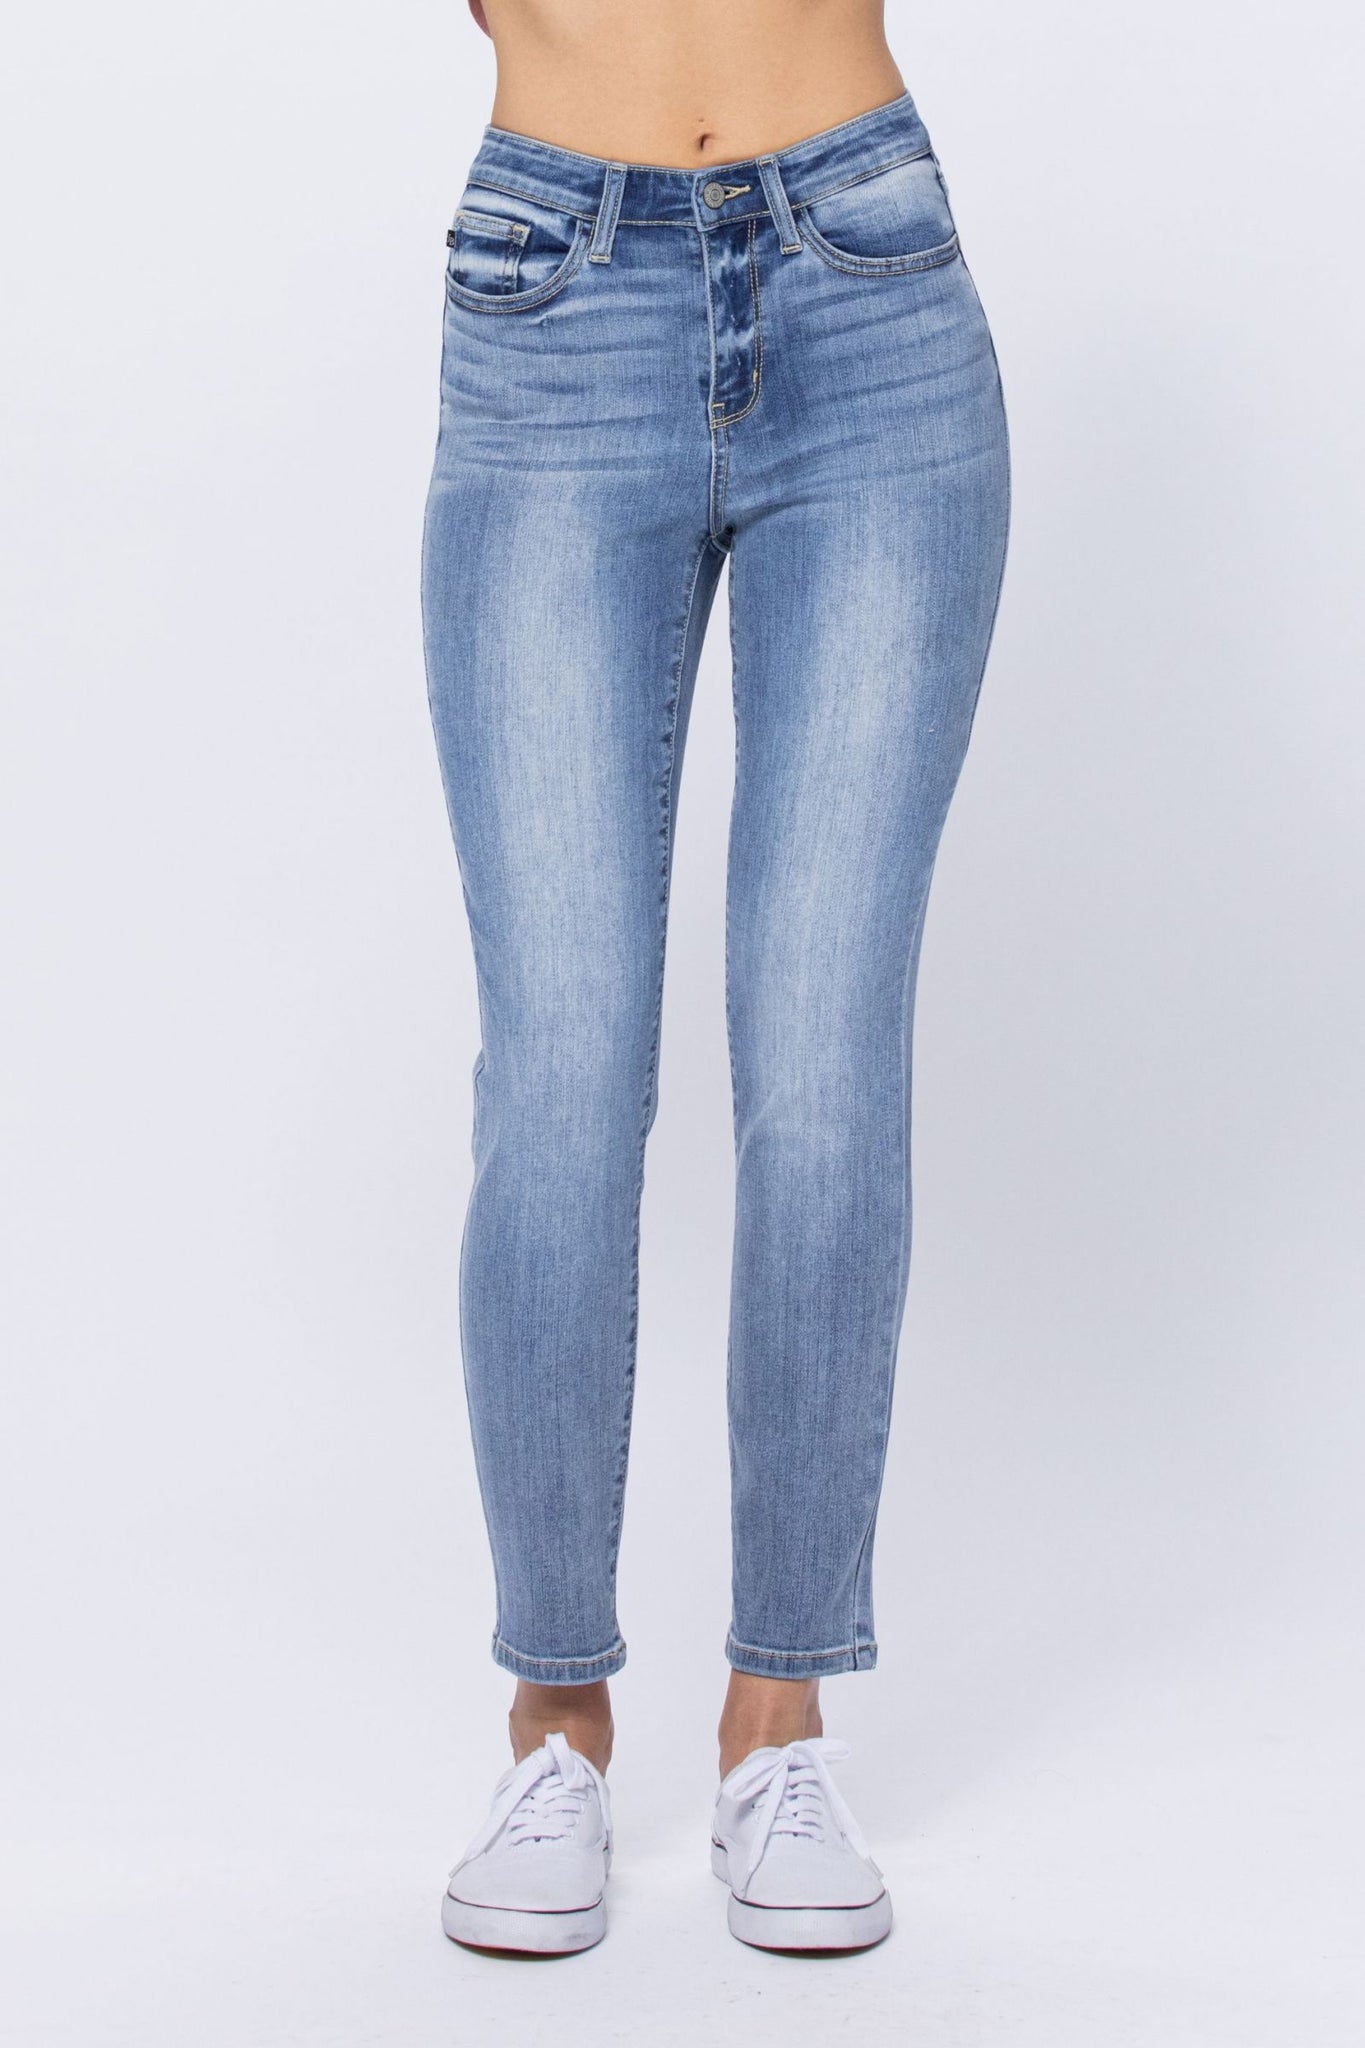 Judy Blue High Waist Light Bleach Wash Relaxed Fit Denim 82336-Jeans-Sunshine and Wine Boutique